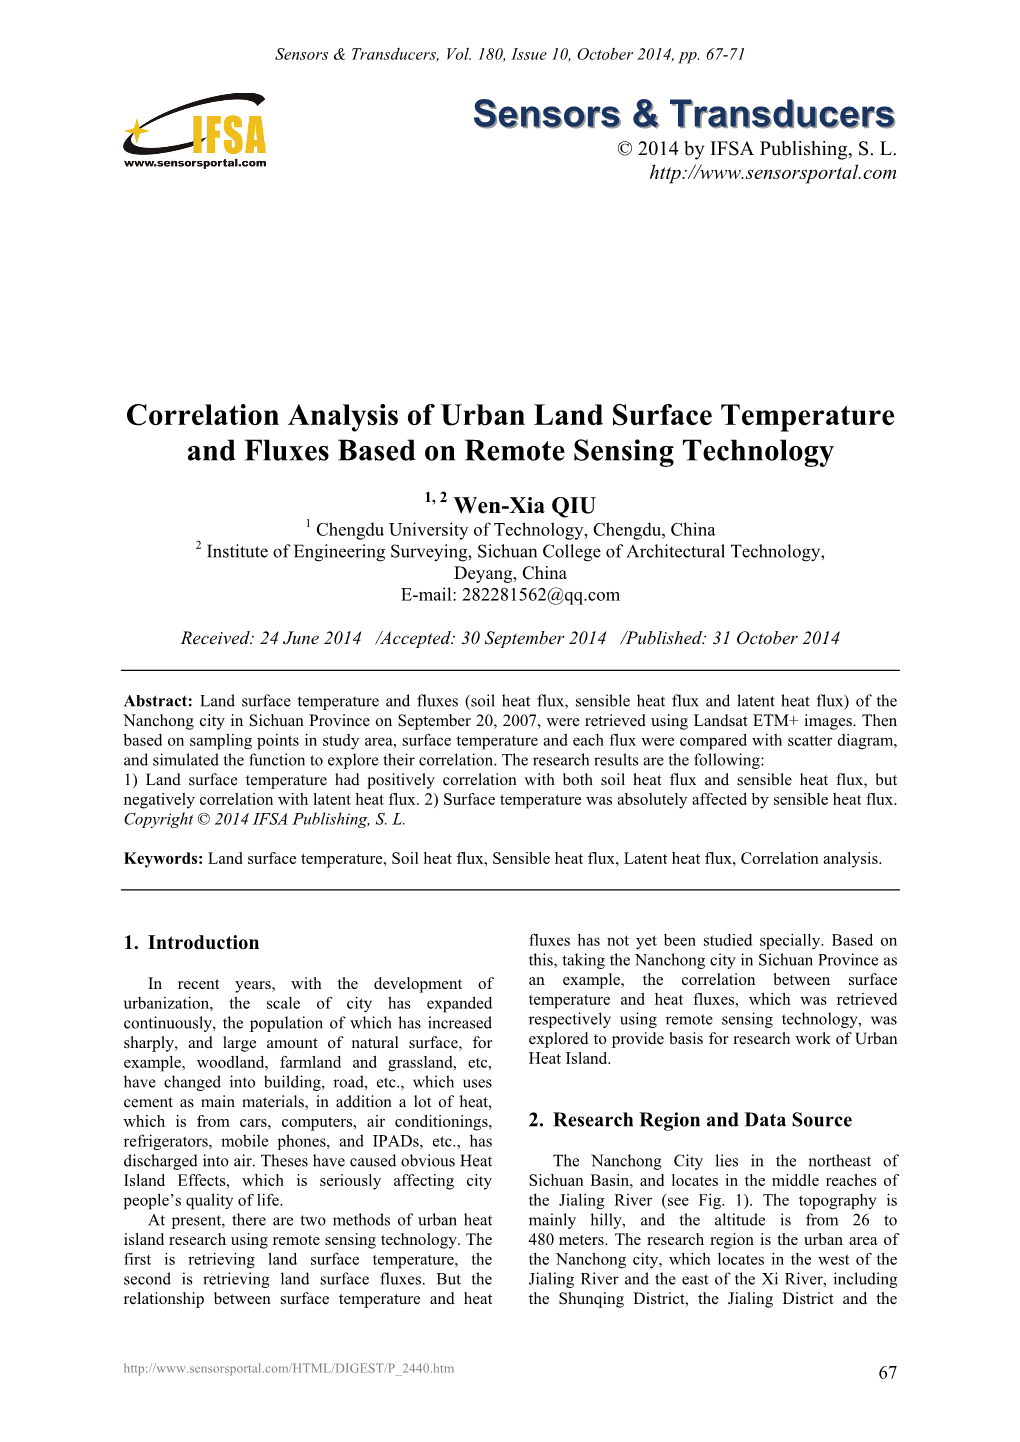 Correlation Analysis of Urban Land Surface Temperature and Fluxes Based on Remote Sensing Technology